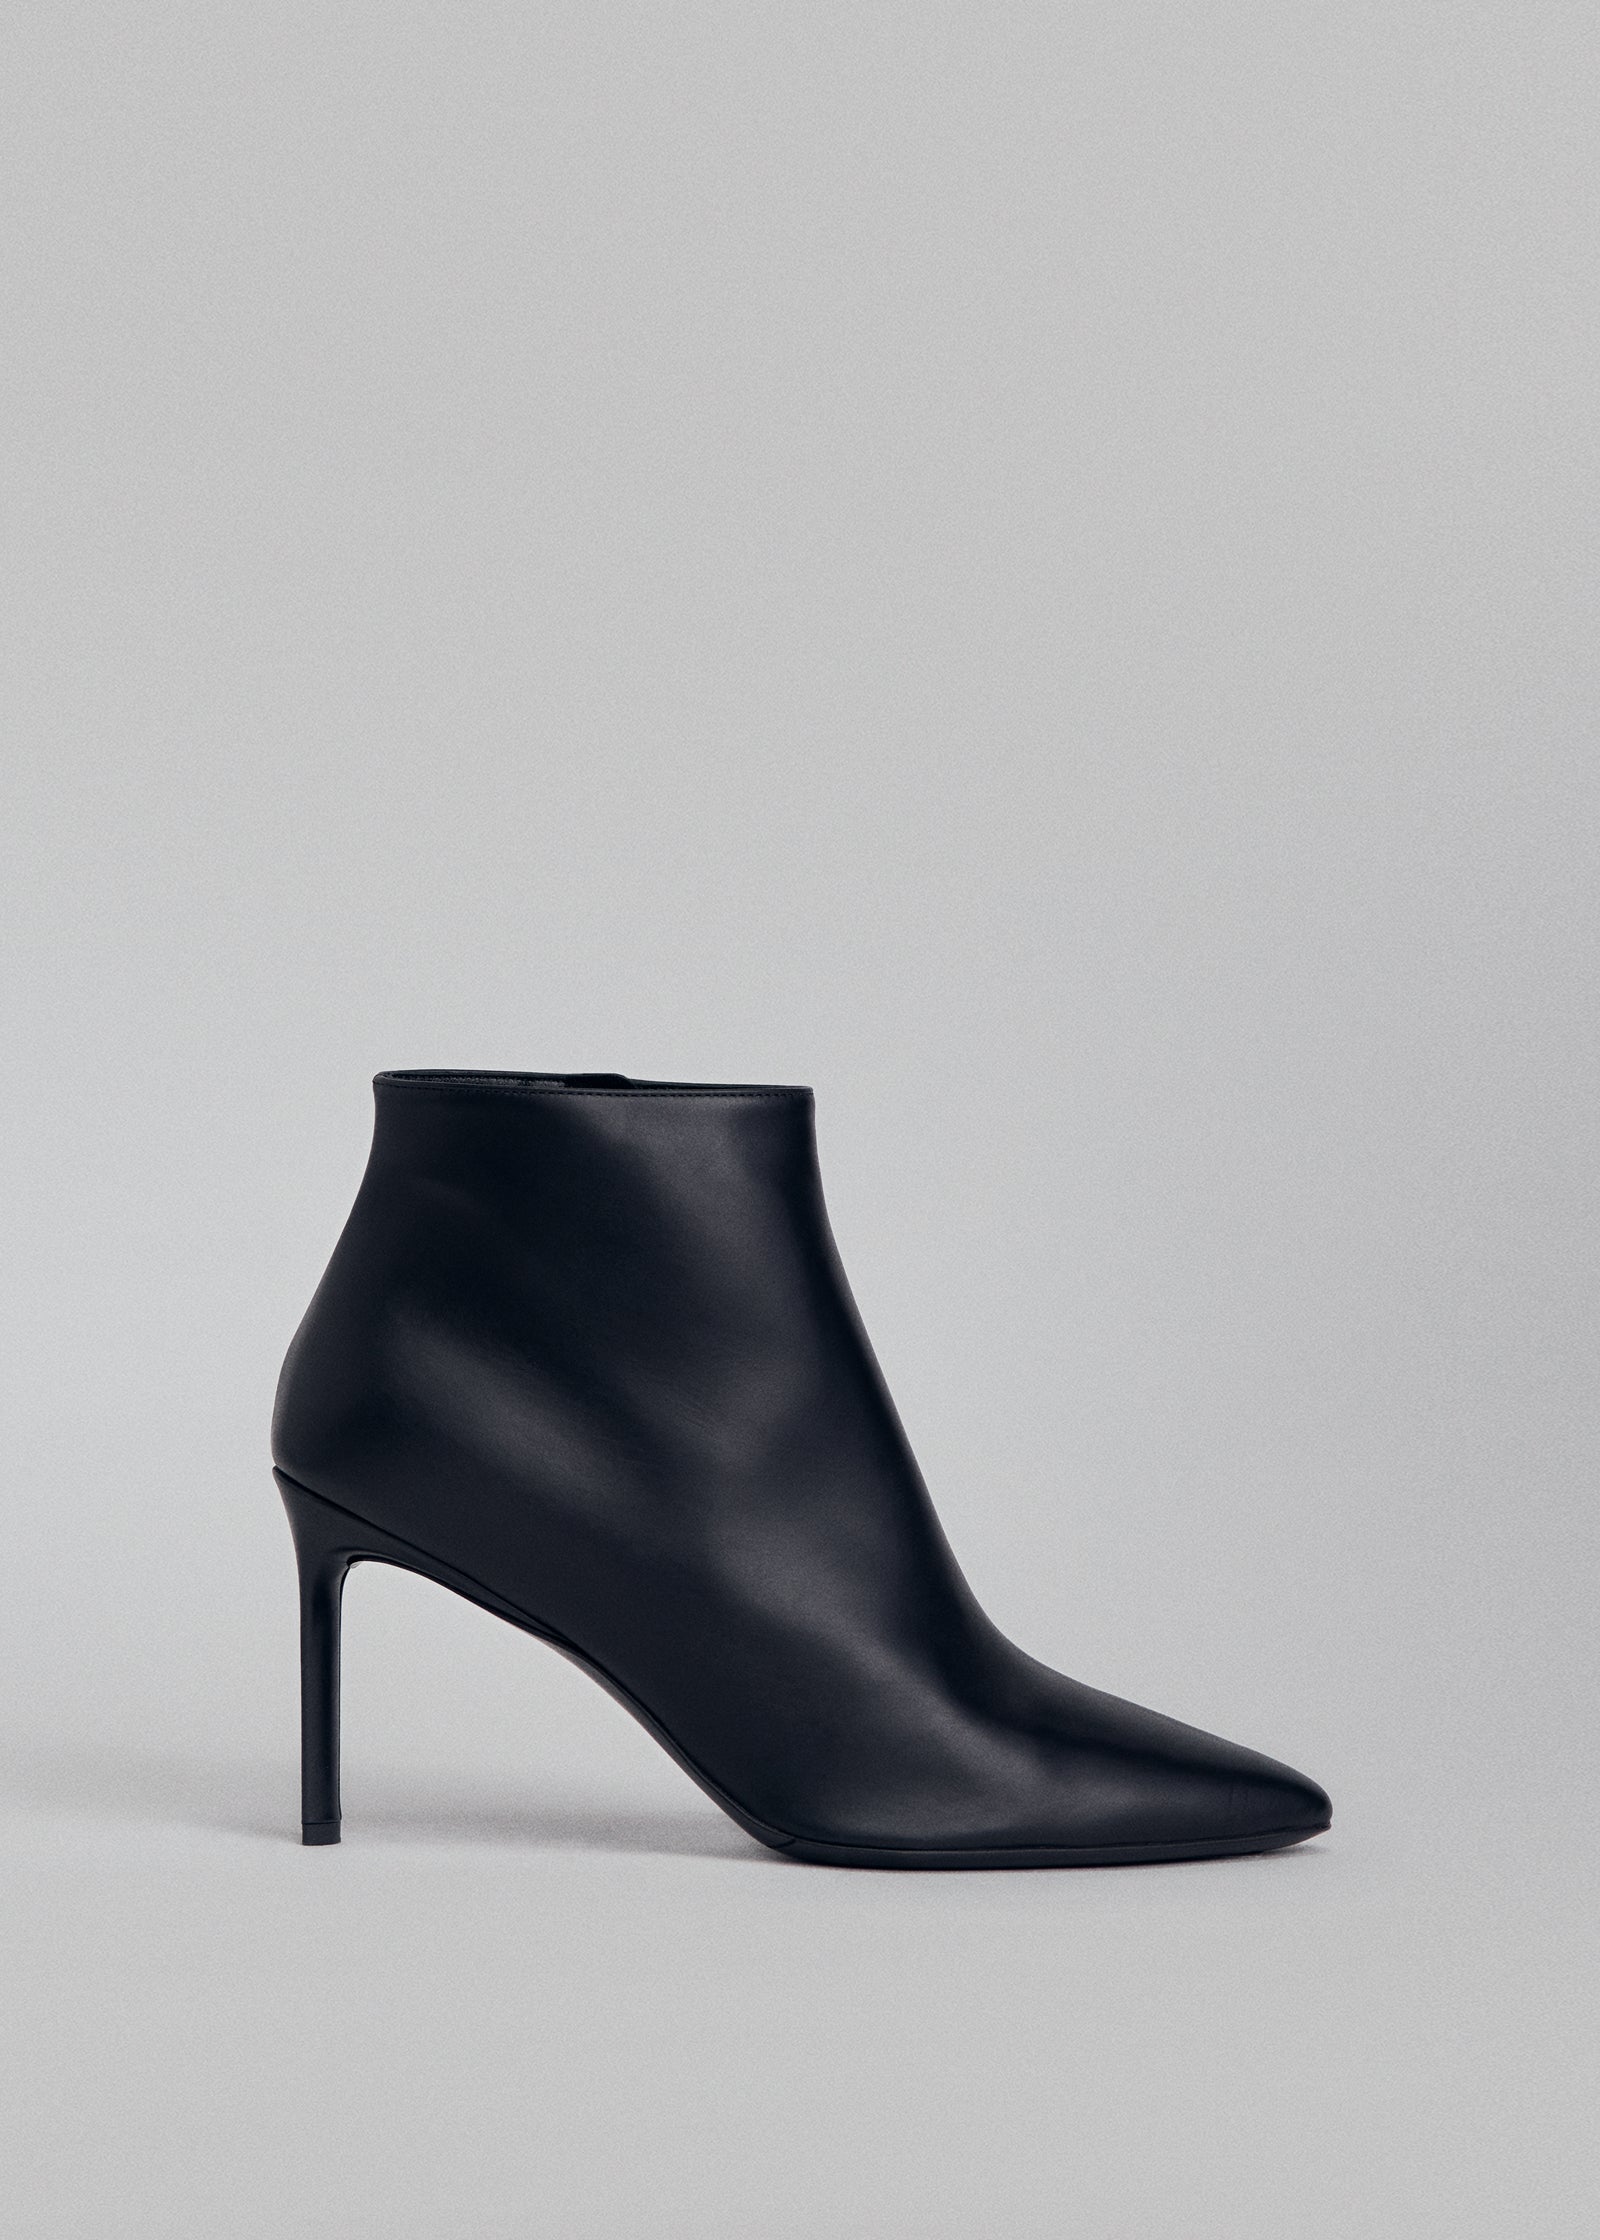 Zara LEATHER HIGH-HEEL ANKLE BOOTS WITH LUG SOLES | Mall of America®